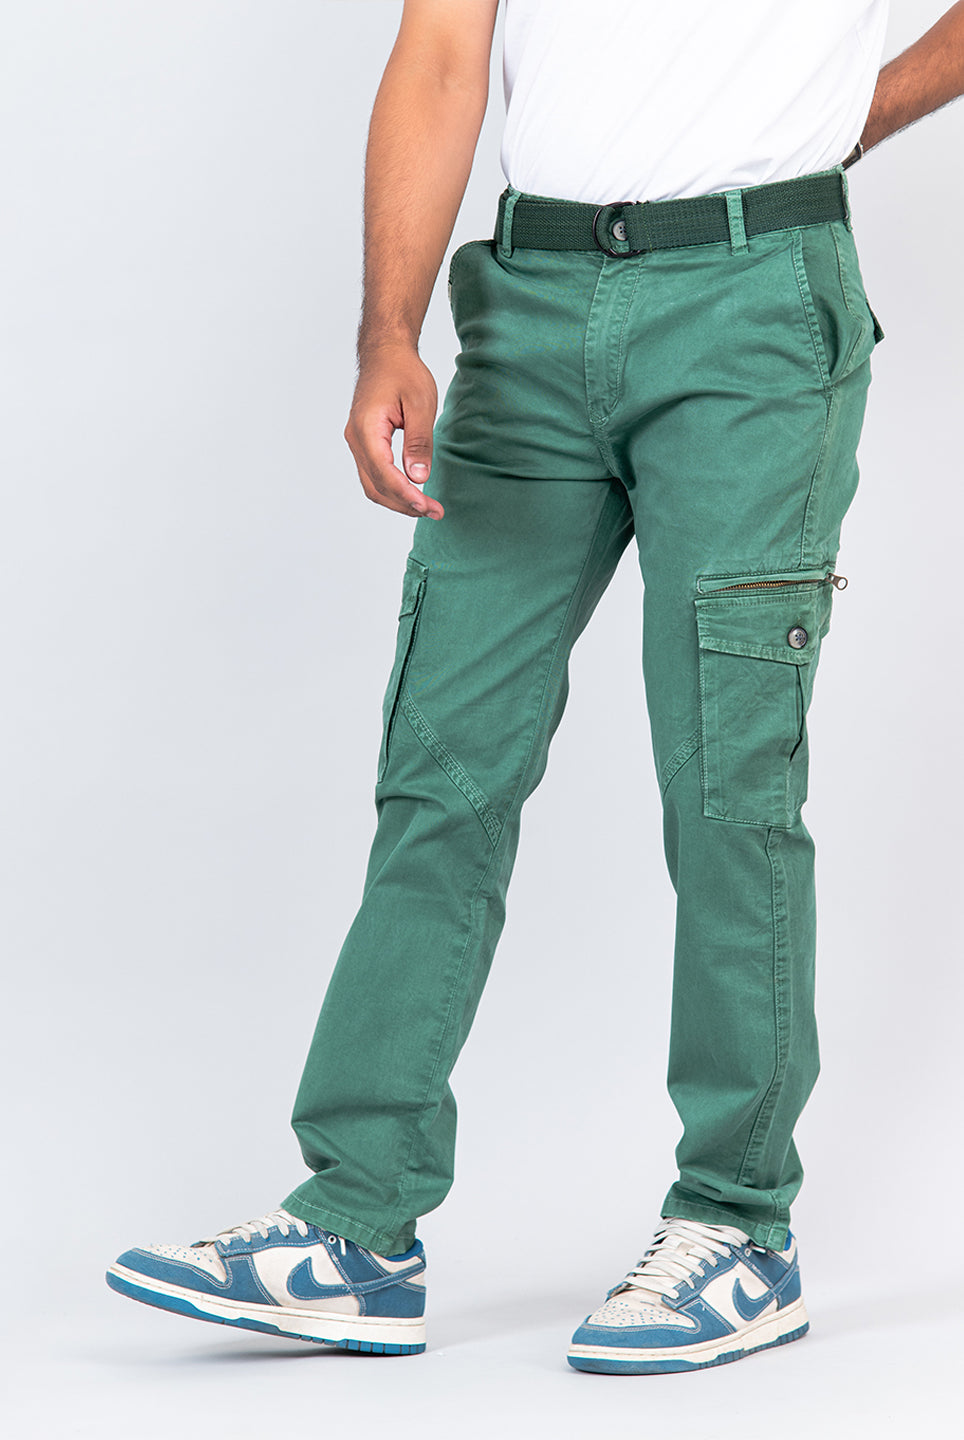 Buy Dark Olive Green Baggy Fit Chinos Cotton Cargo Pants Online